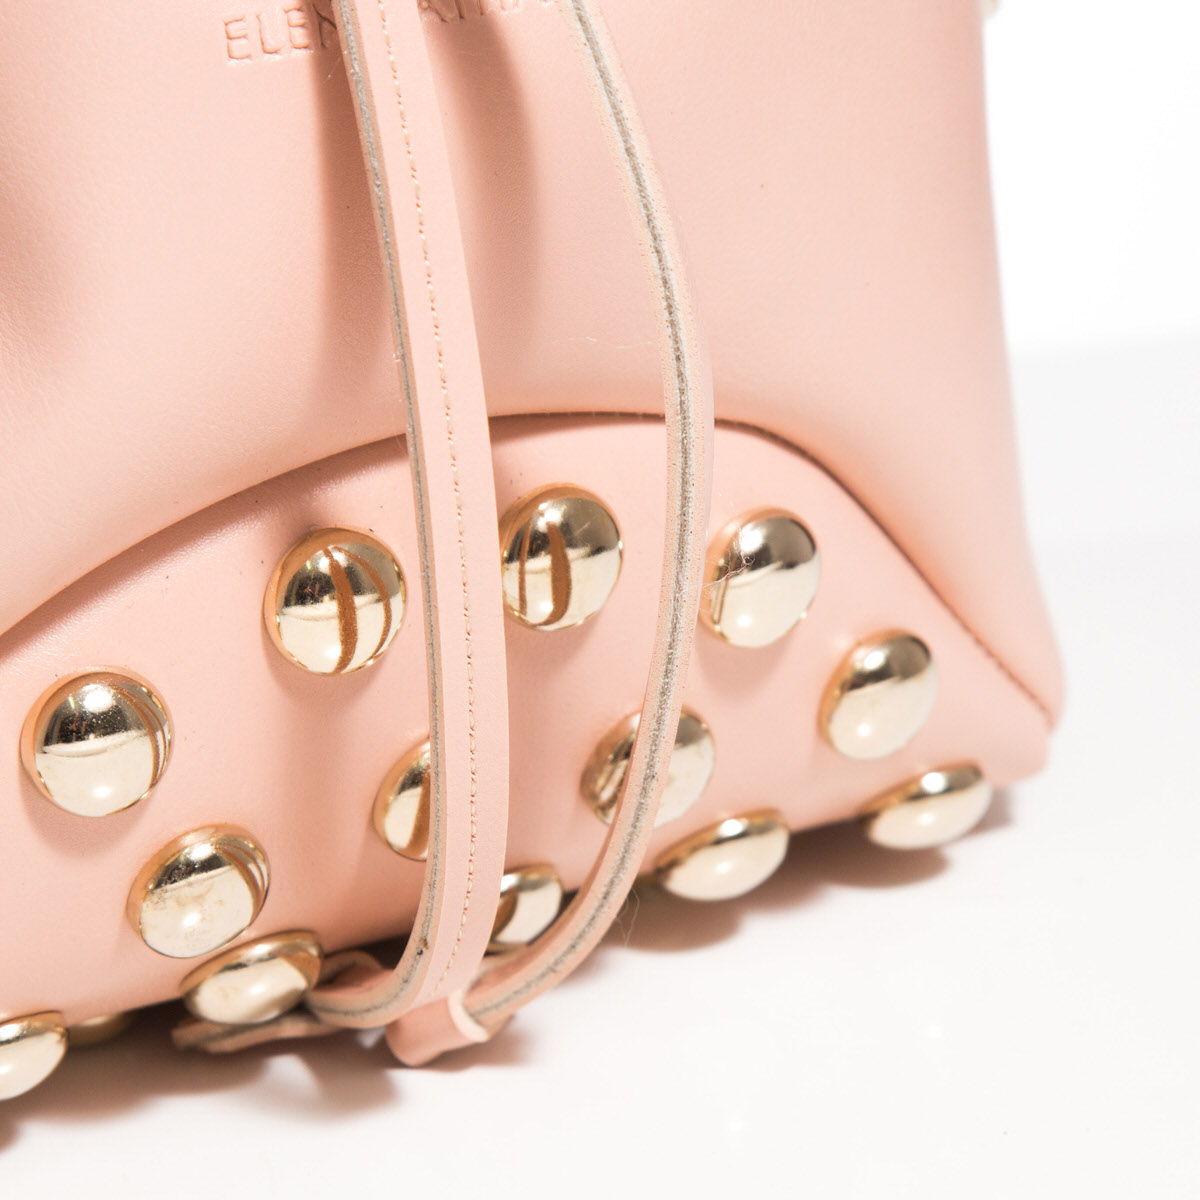 Pouch Bag Fresh Baby Pink Elena Athanasiou Leather Bags